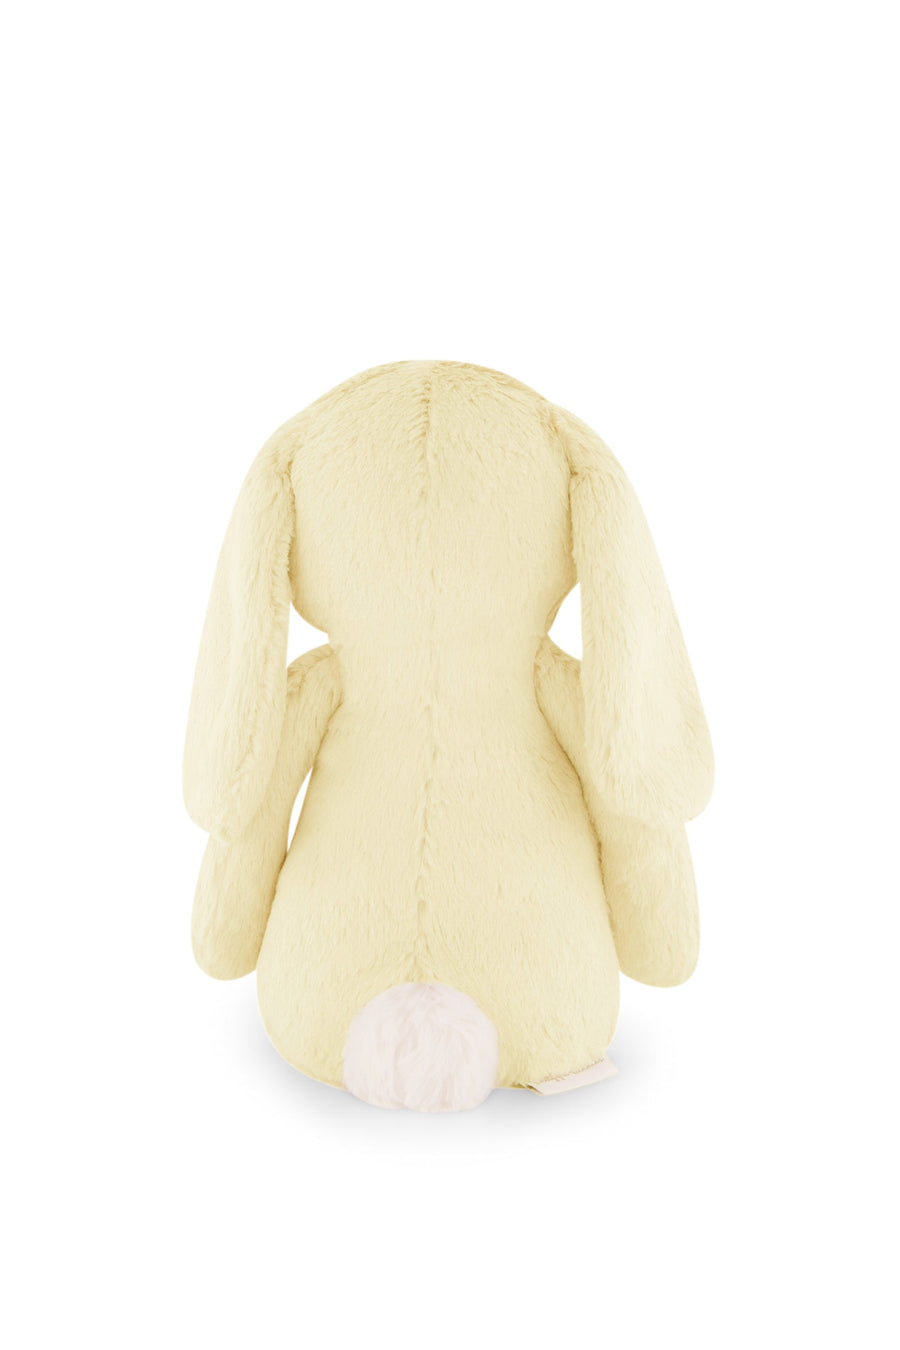 Snuggle Bunnies - Penelope the Bunny - Anise Childrens Toy from Jamie Kay NZ